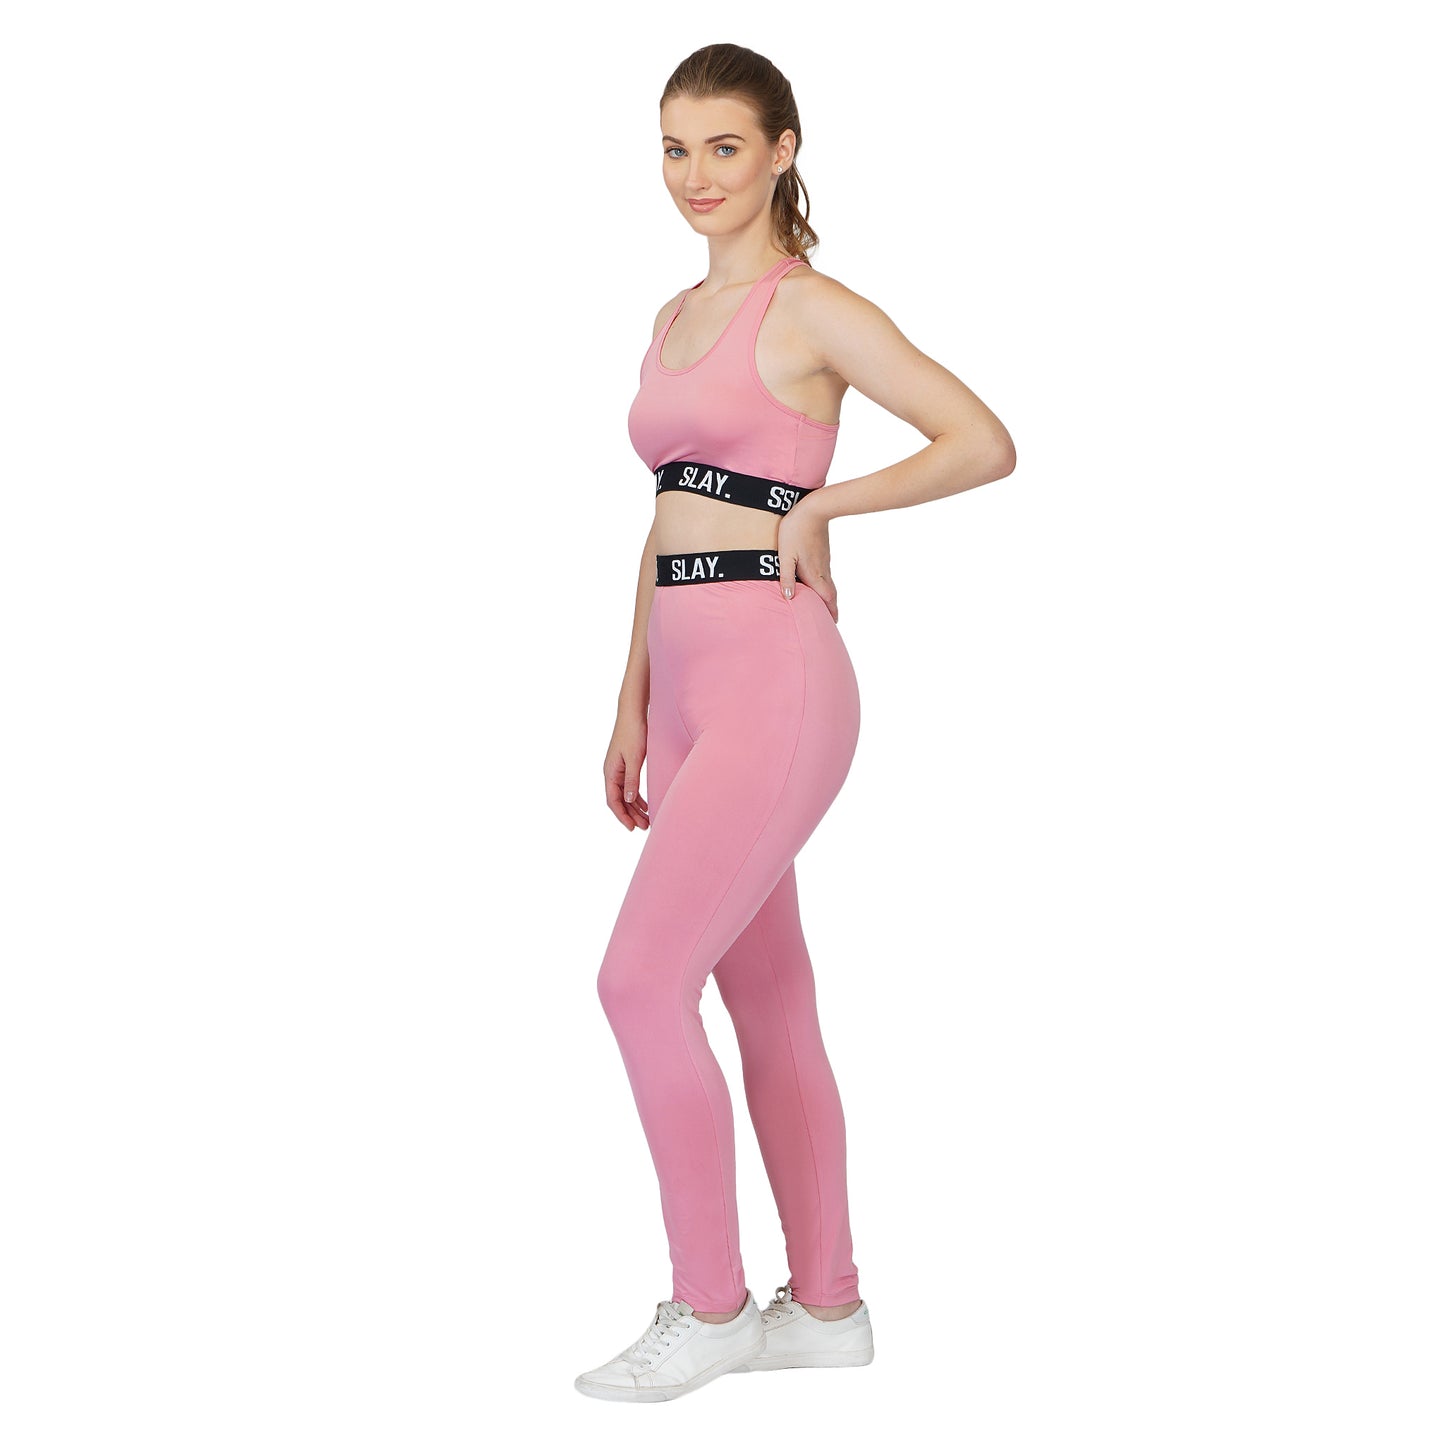 SLAY. Sport Women's Activewear Crop Top And Pants Co-ord Set Pink